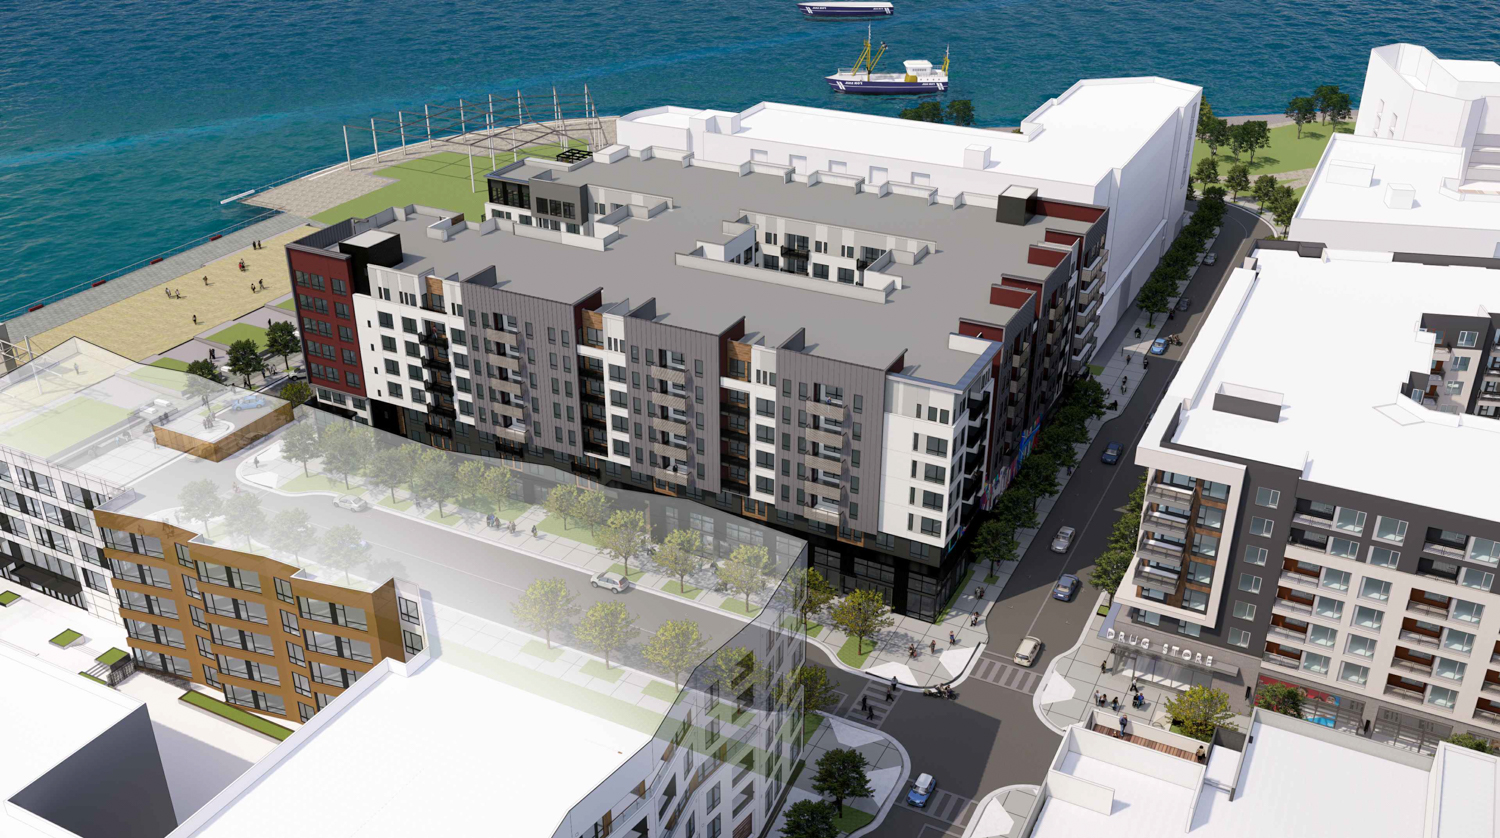 Brooklyn Basin Parcel D aerial view looking south, rendering by Architecture Design Collaborative